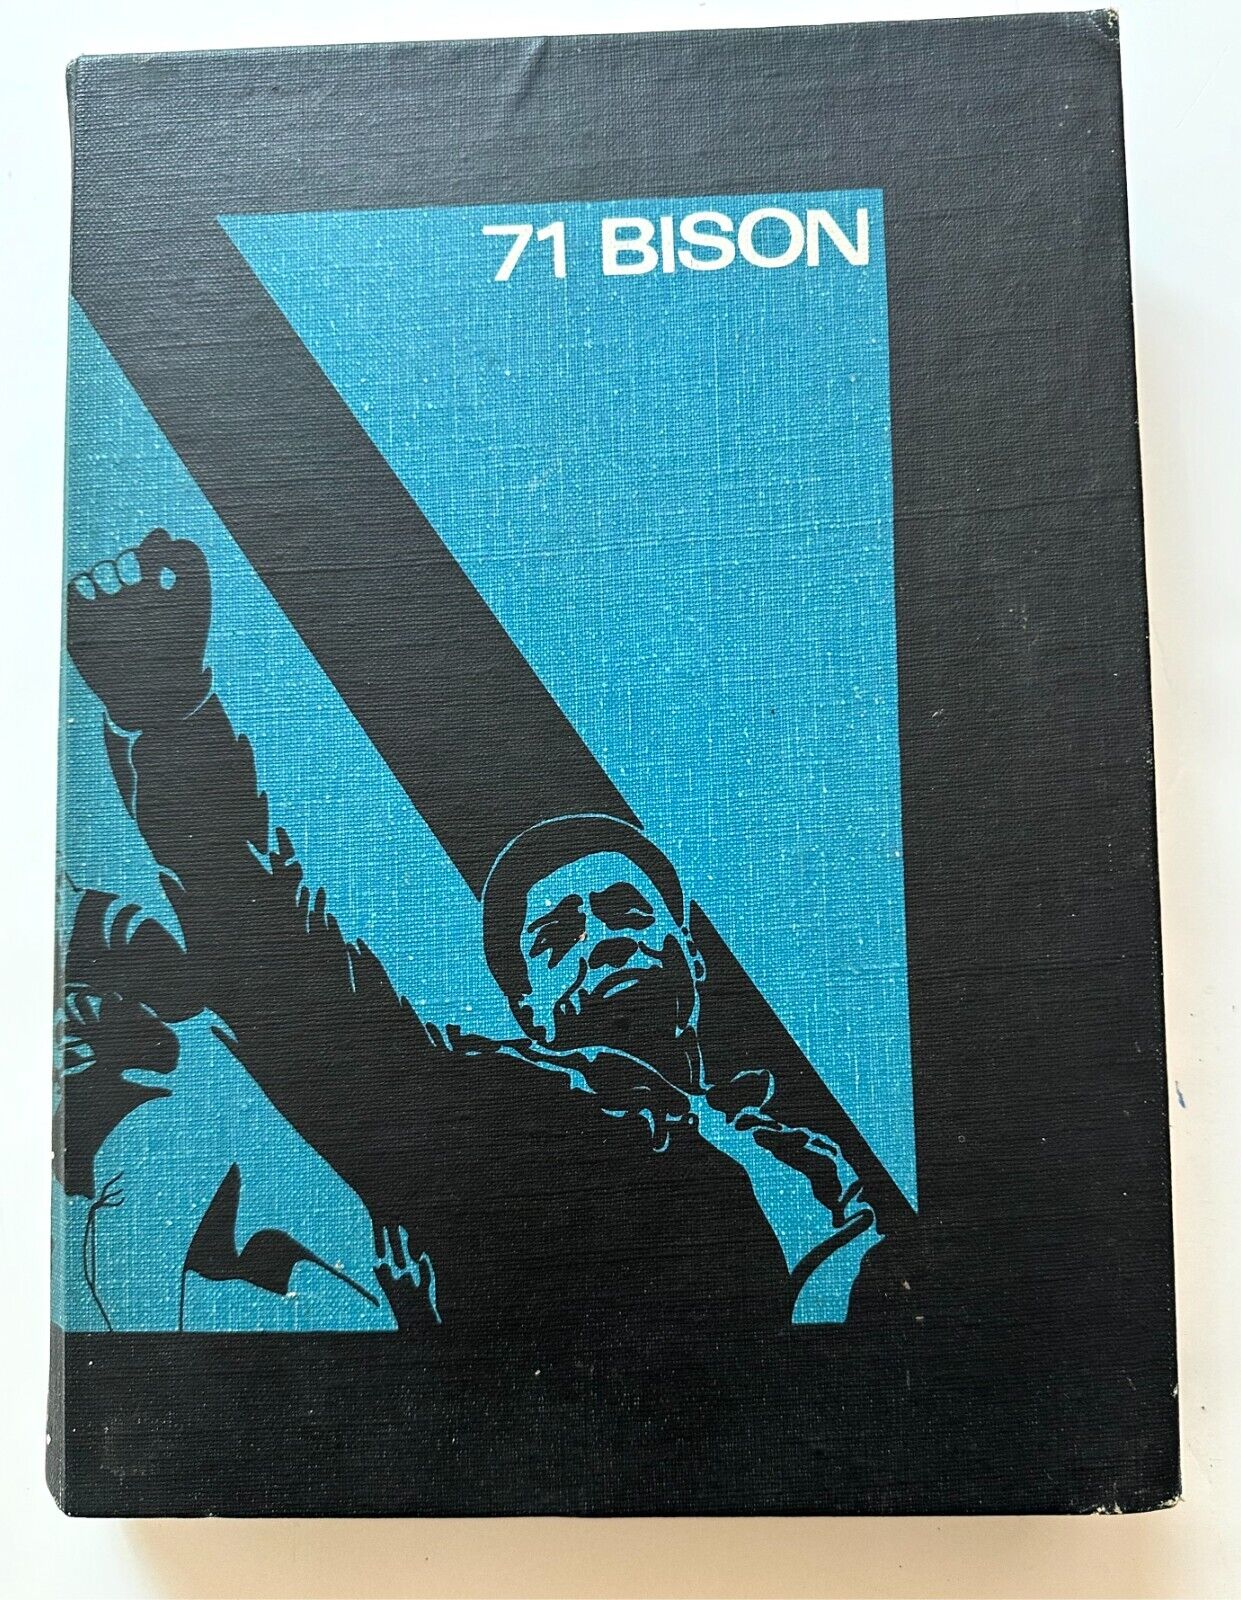 1971 DC HOWARD UNIVERSITY BISON YEARBOOK w/ Commencement Booklets